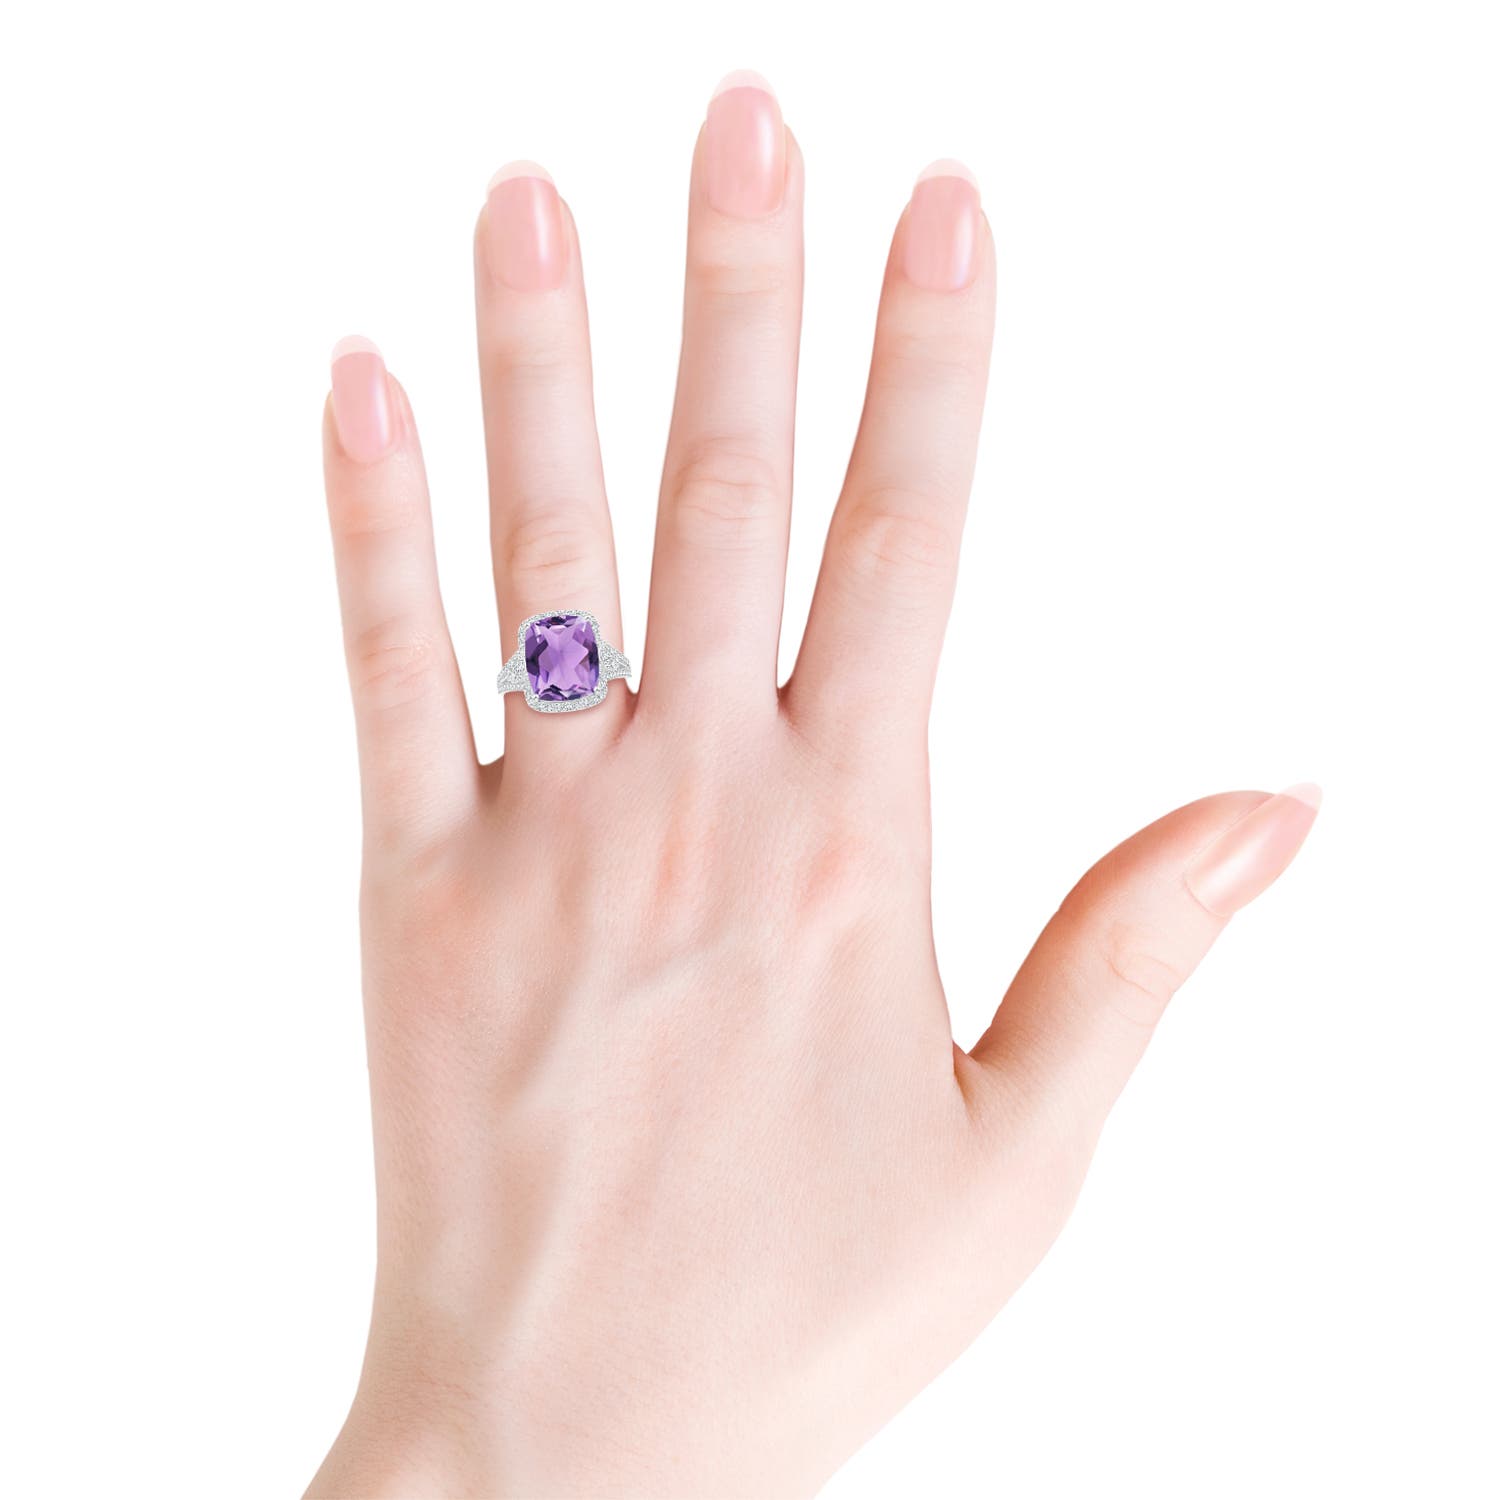 A - Amethyst / 5.06 CT / 14 KT White Gold